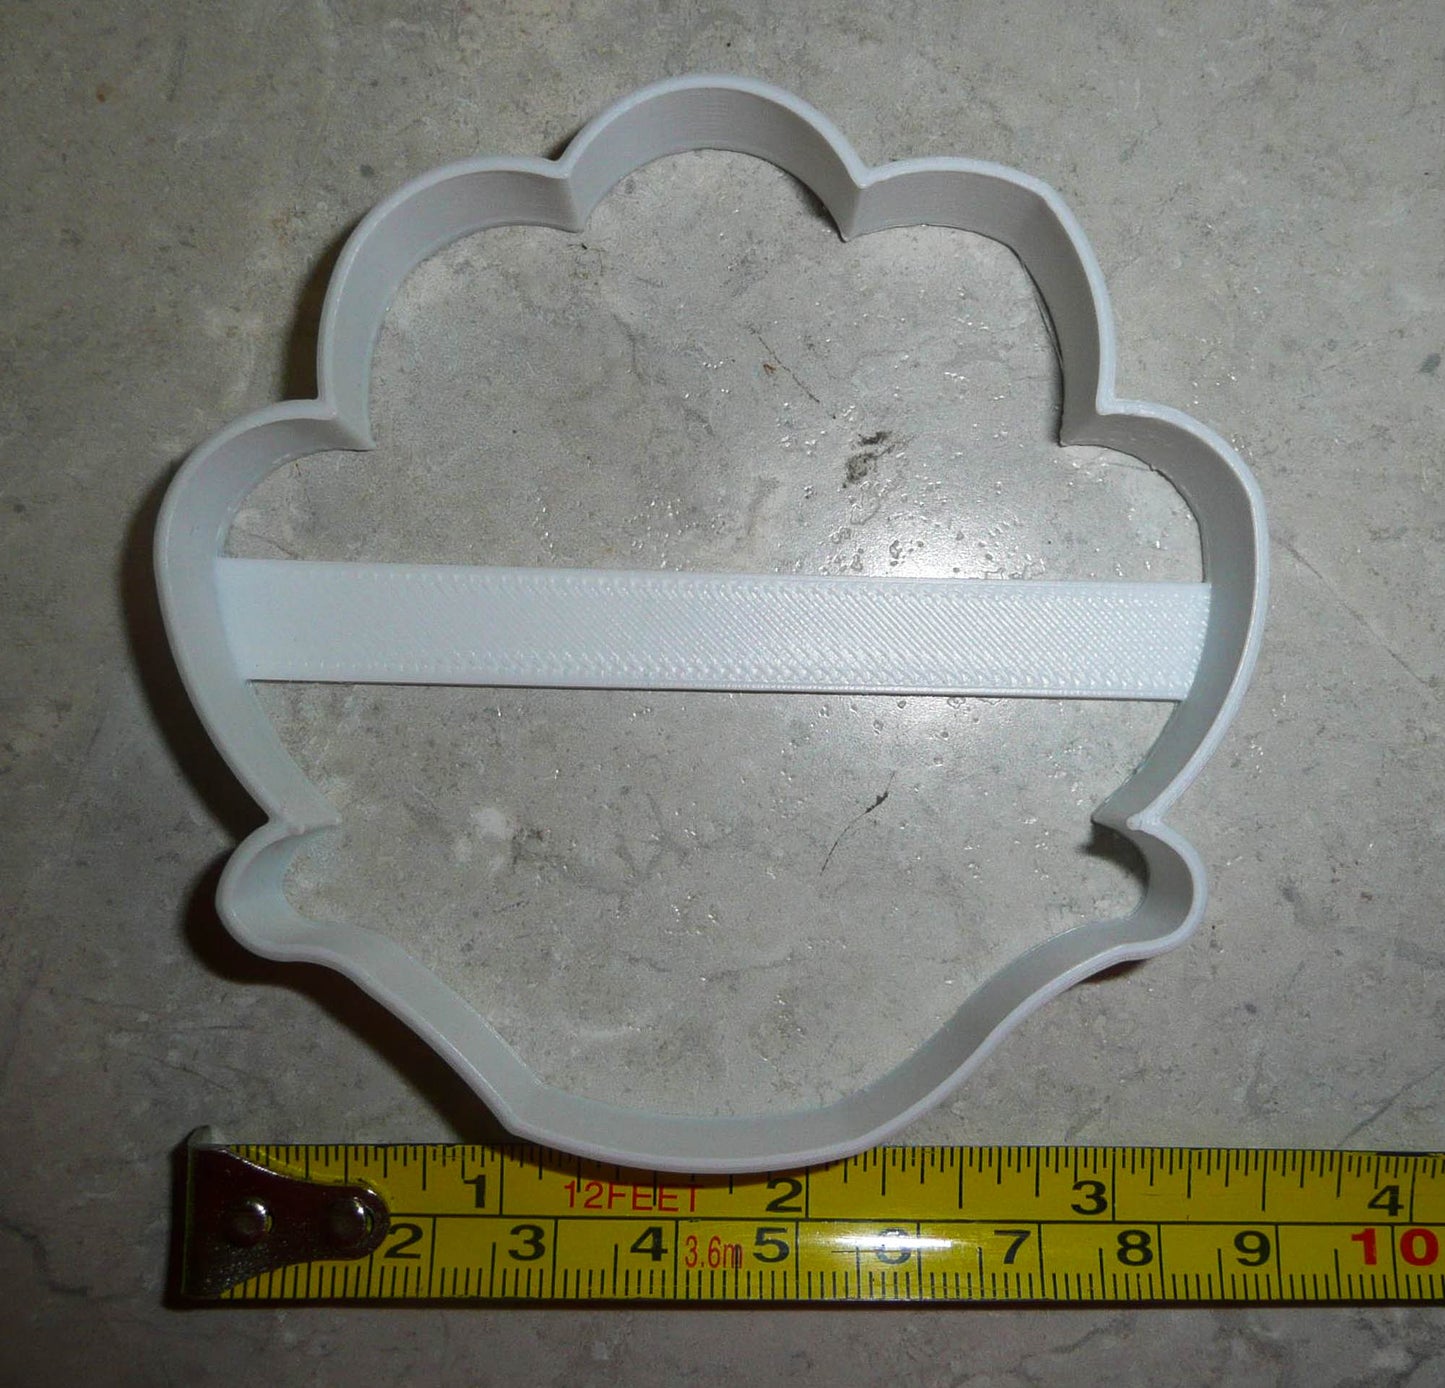 Lotus Flower Or Clam Shell Outline Cookie Cutter Baking Tool USA PR3125